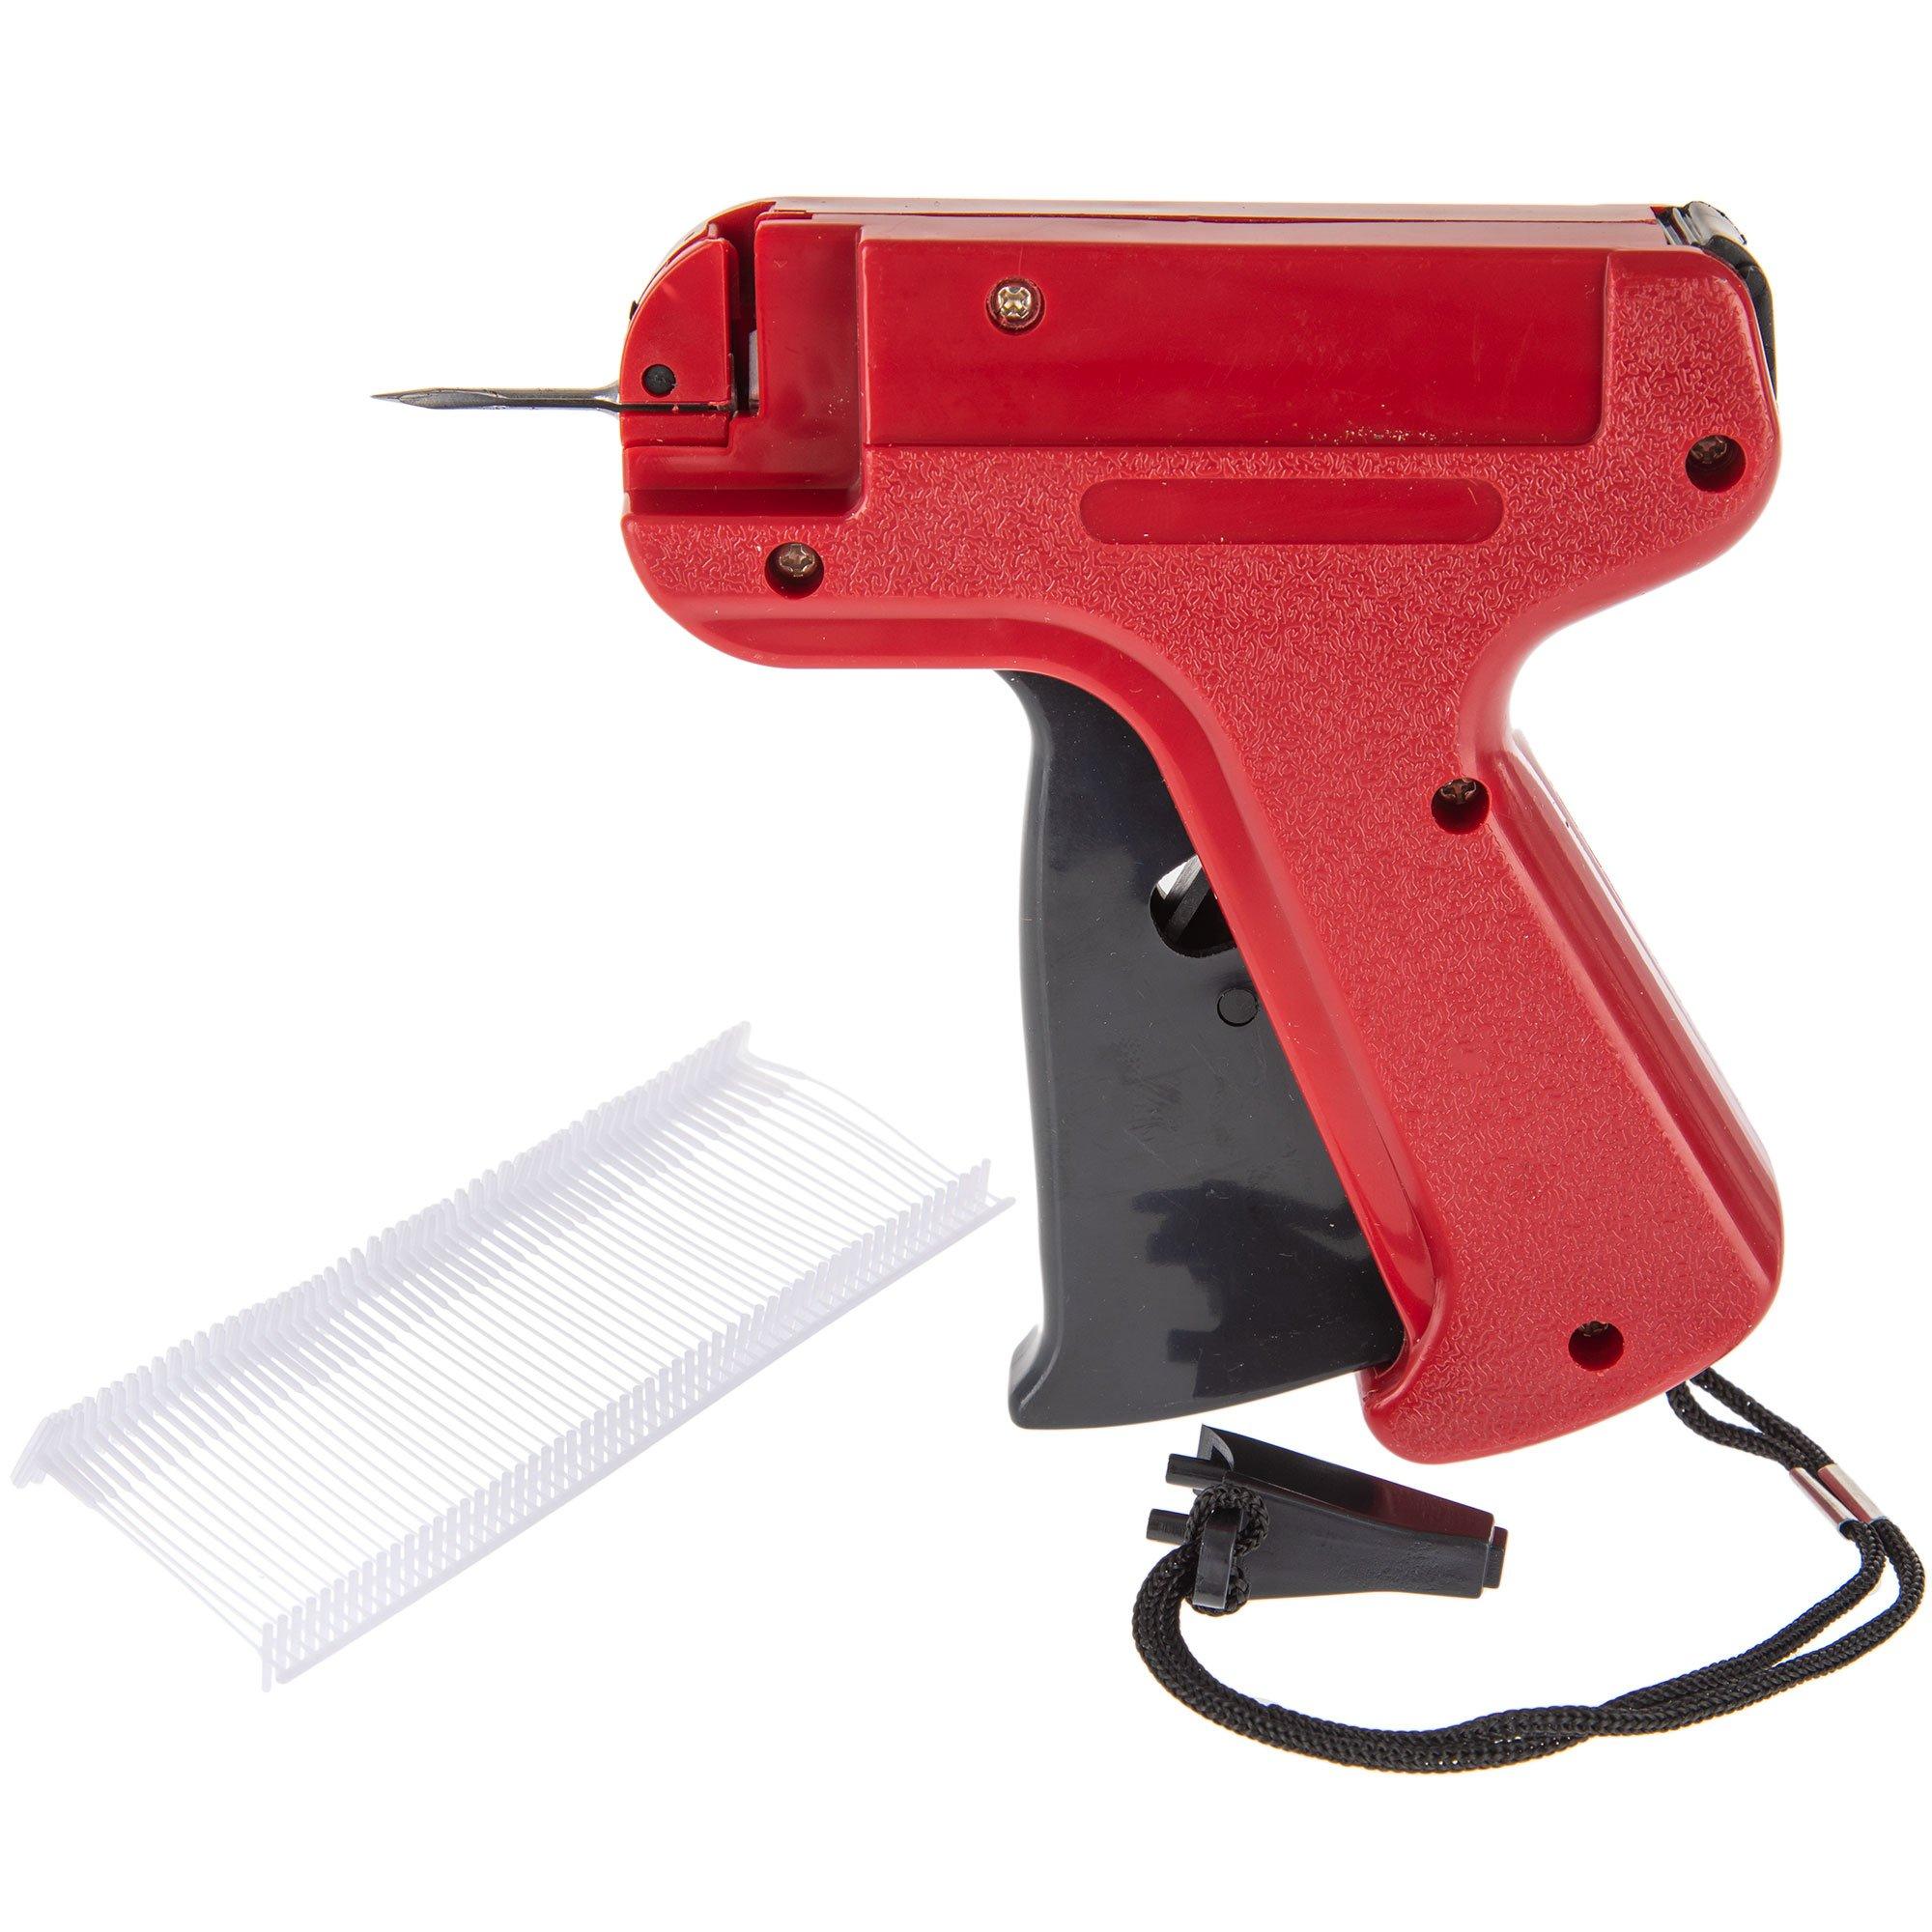 Micro Stitch Gun for Clothes, Pricemarker Labels, Clothes Label